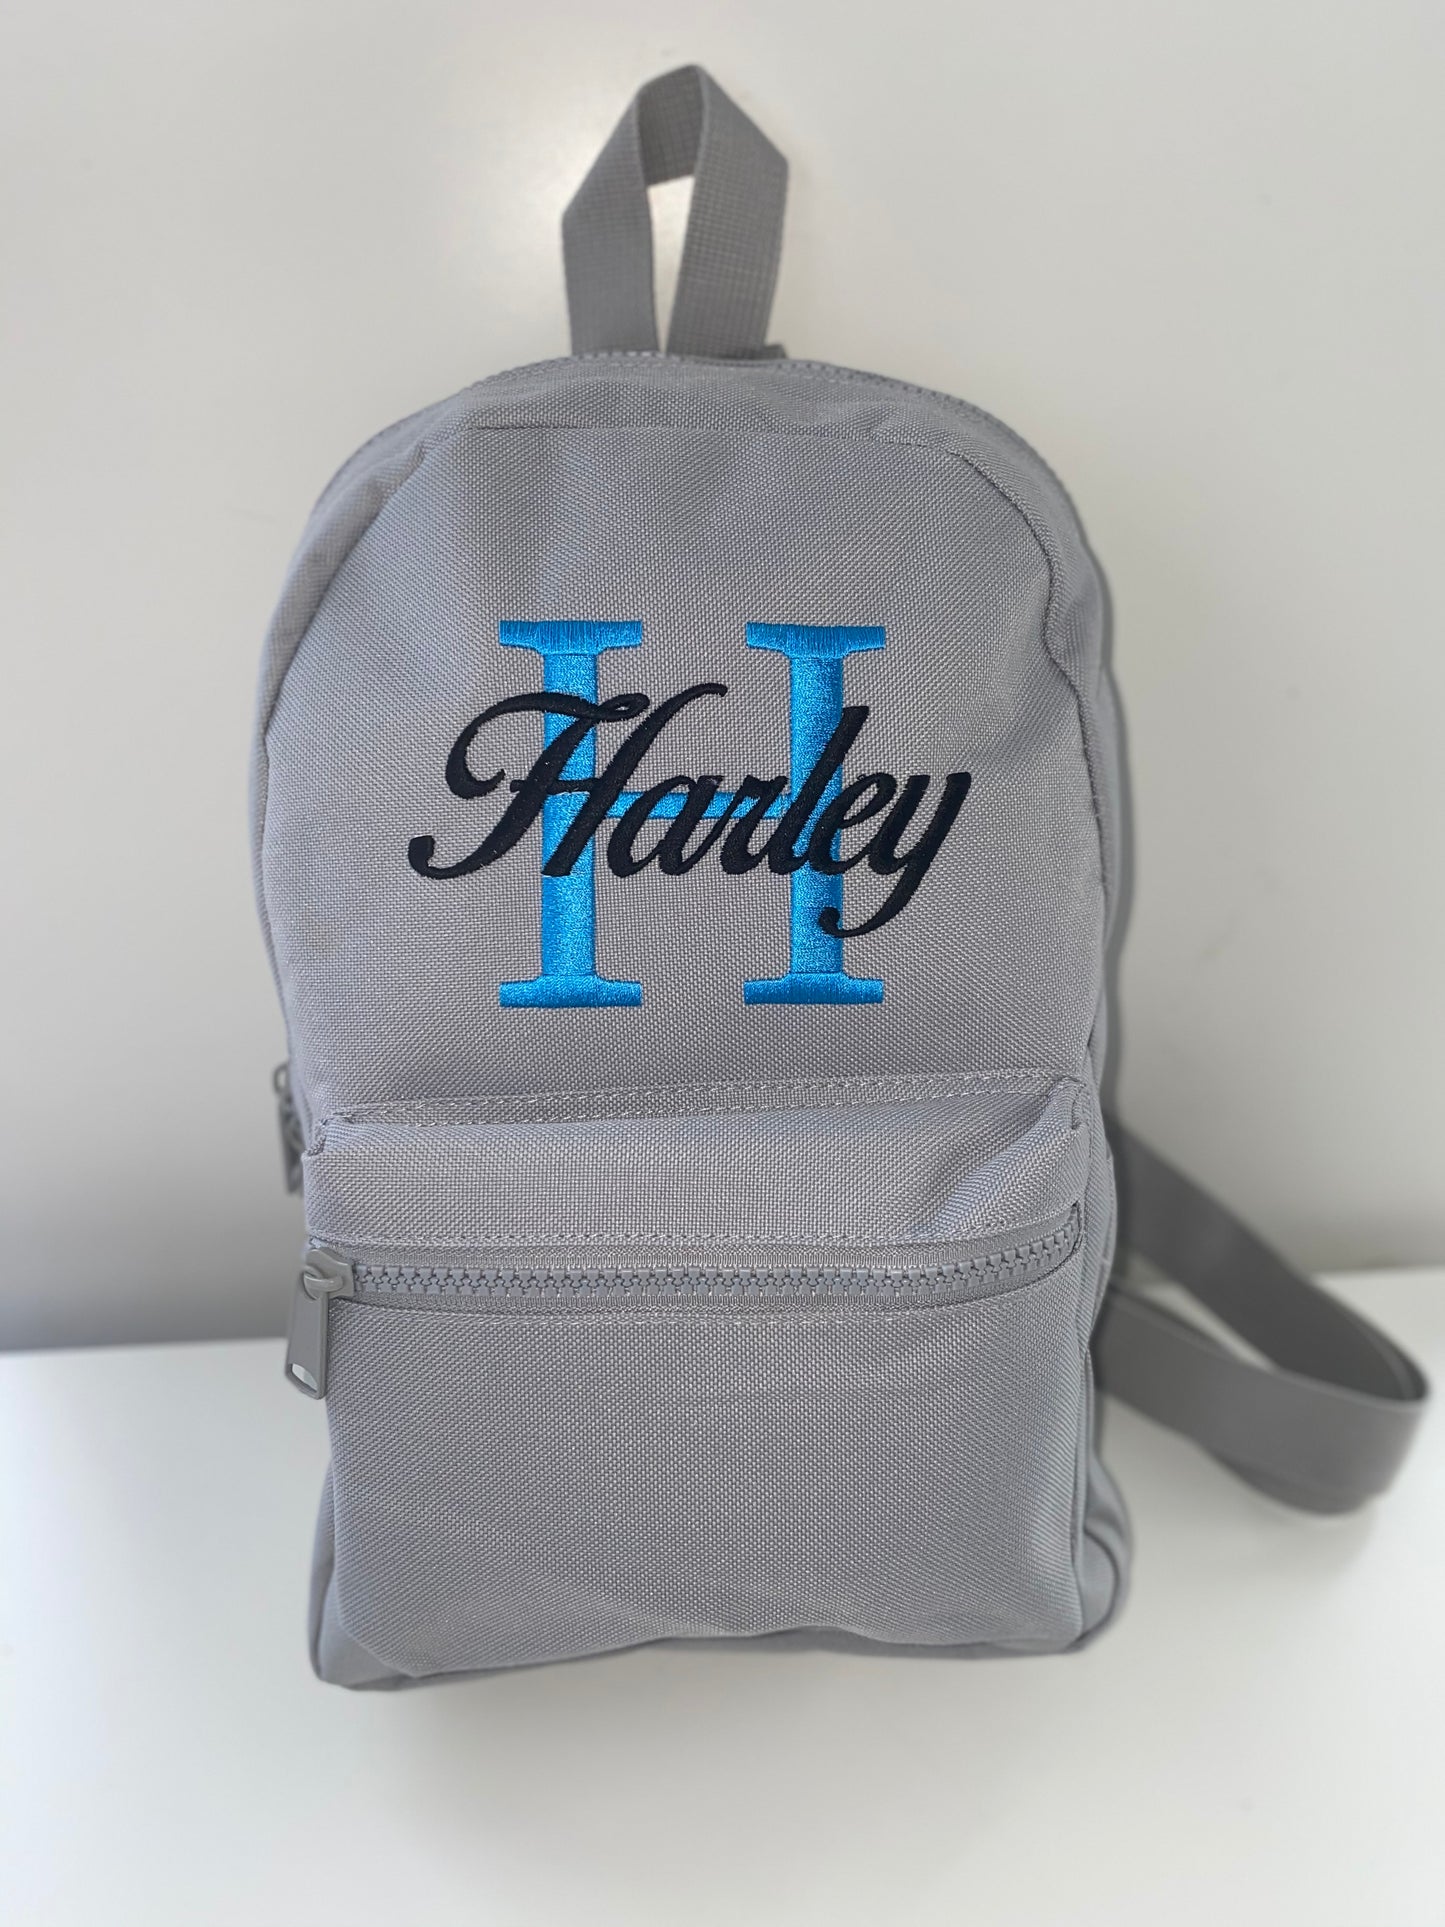 Grey Embroidered Backpack - Bright Blue Initial - Black Birds of Paradise Font